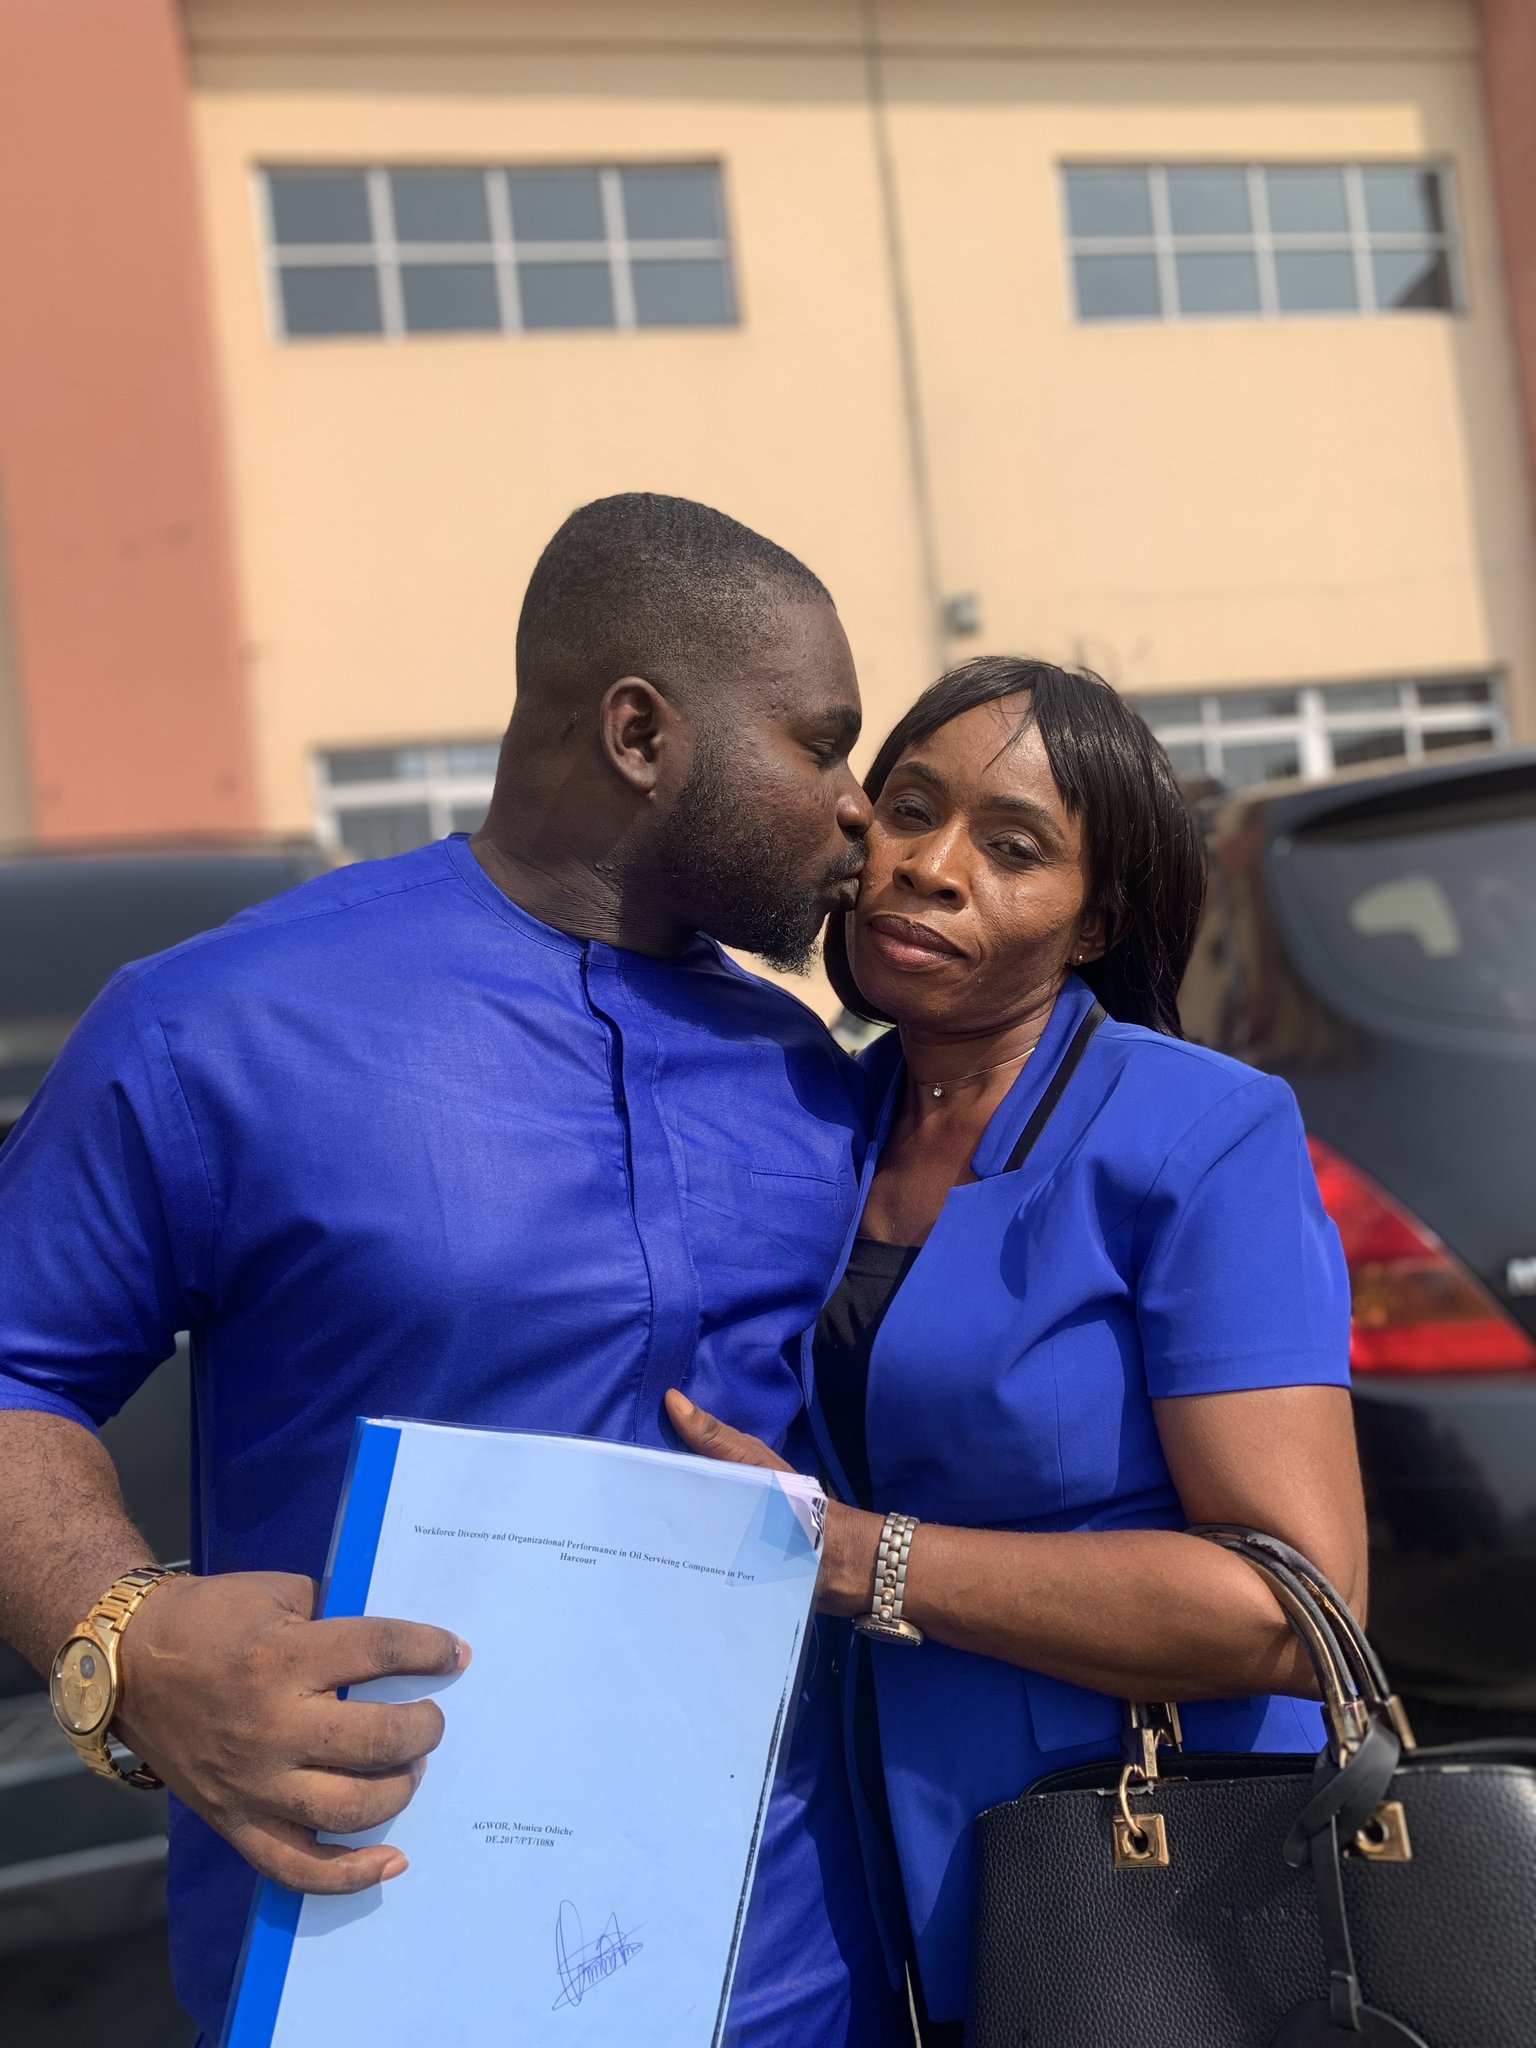 Man celebrates mom as she graduates 20 years after dropping out to send him to school [photos]